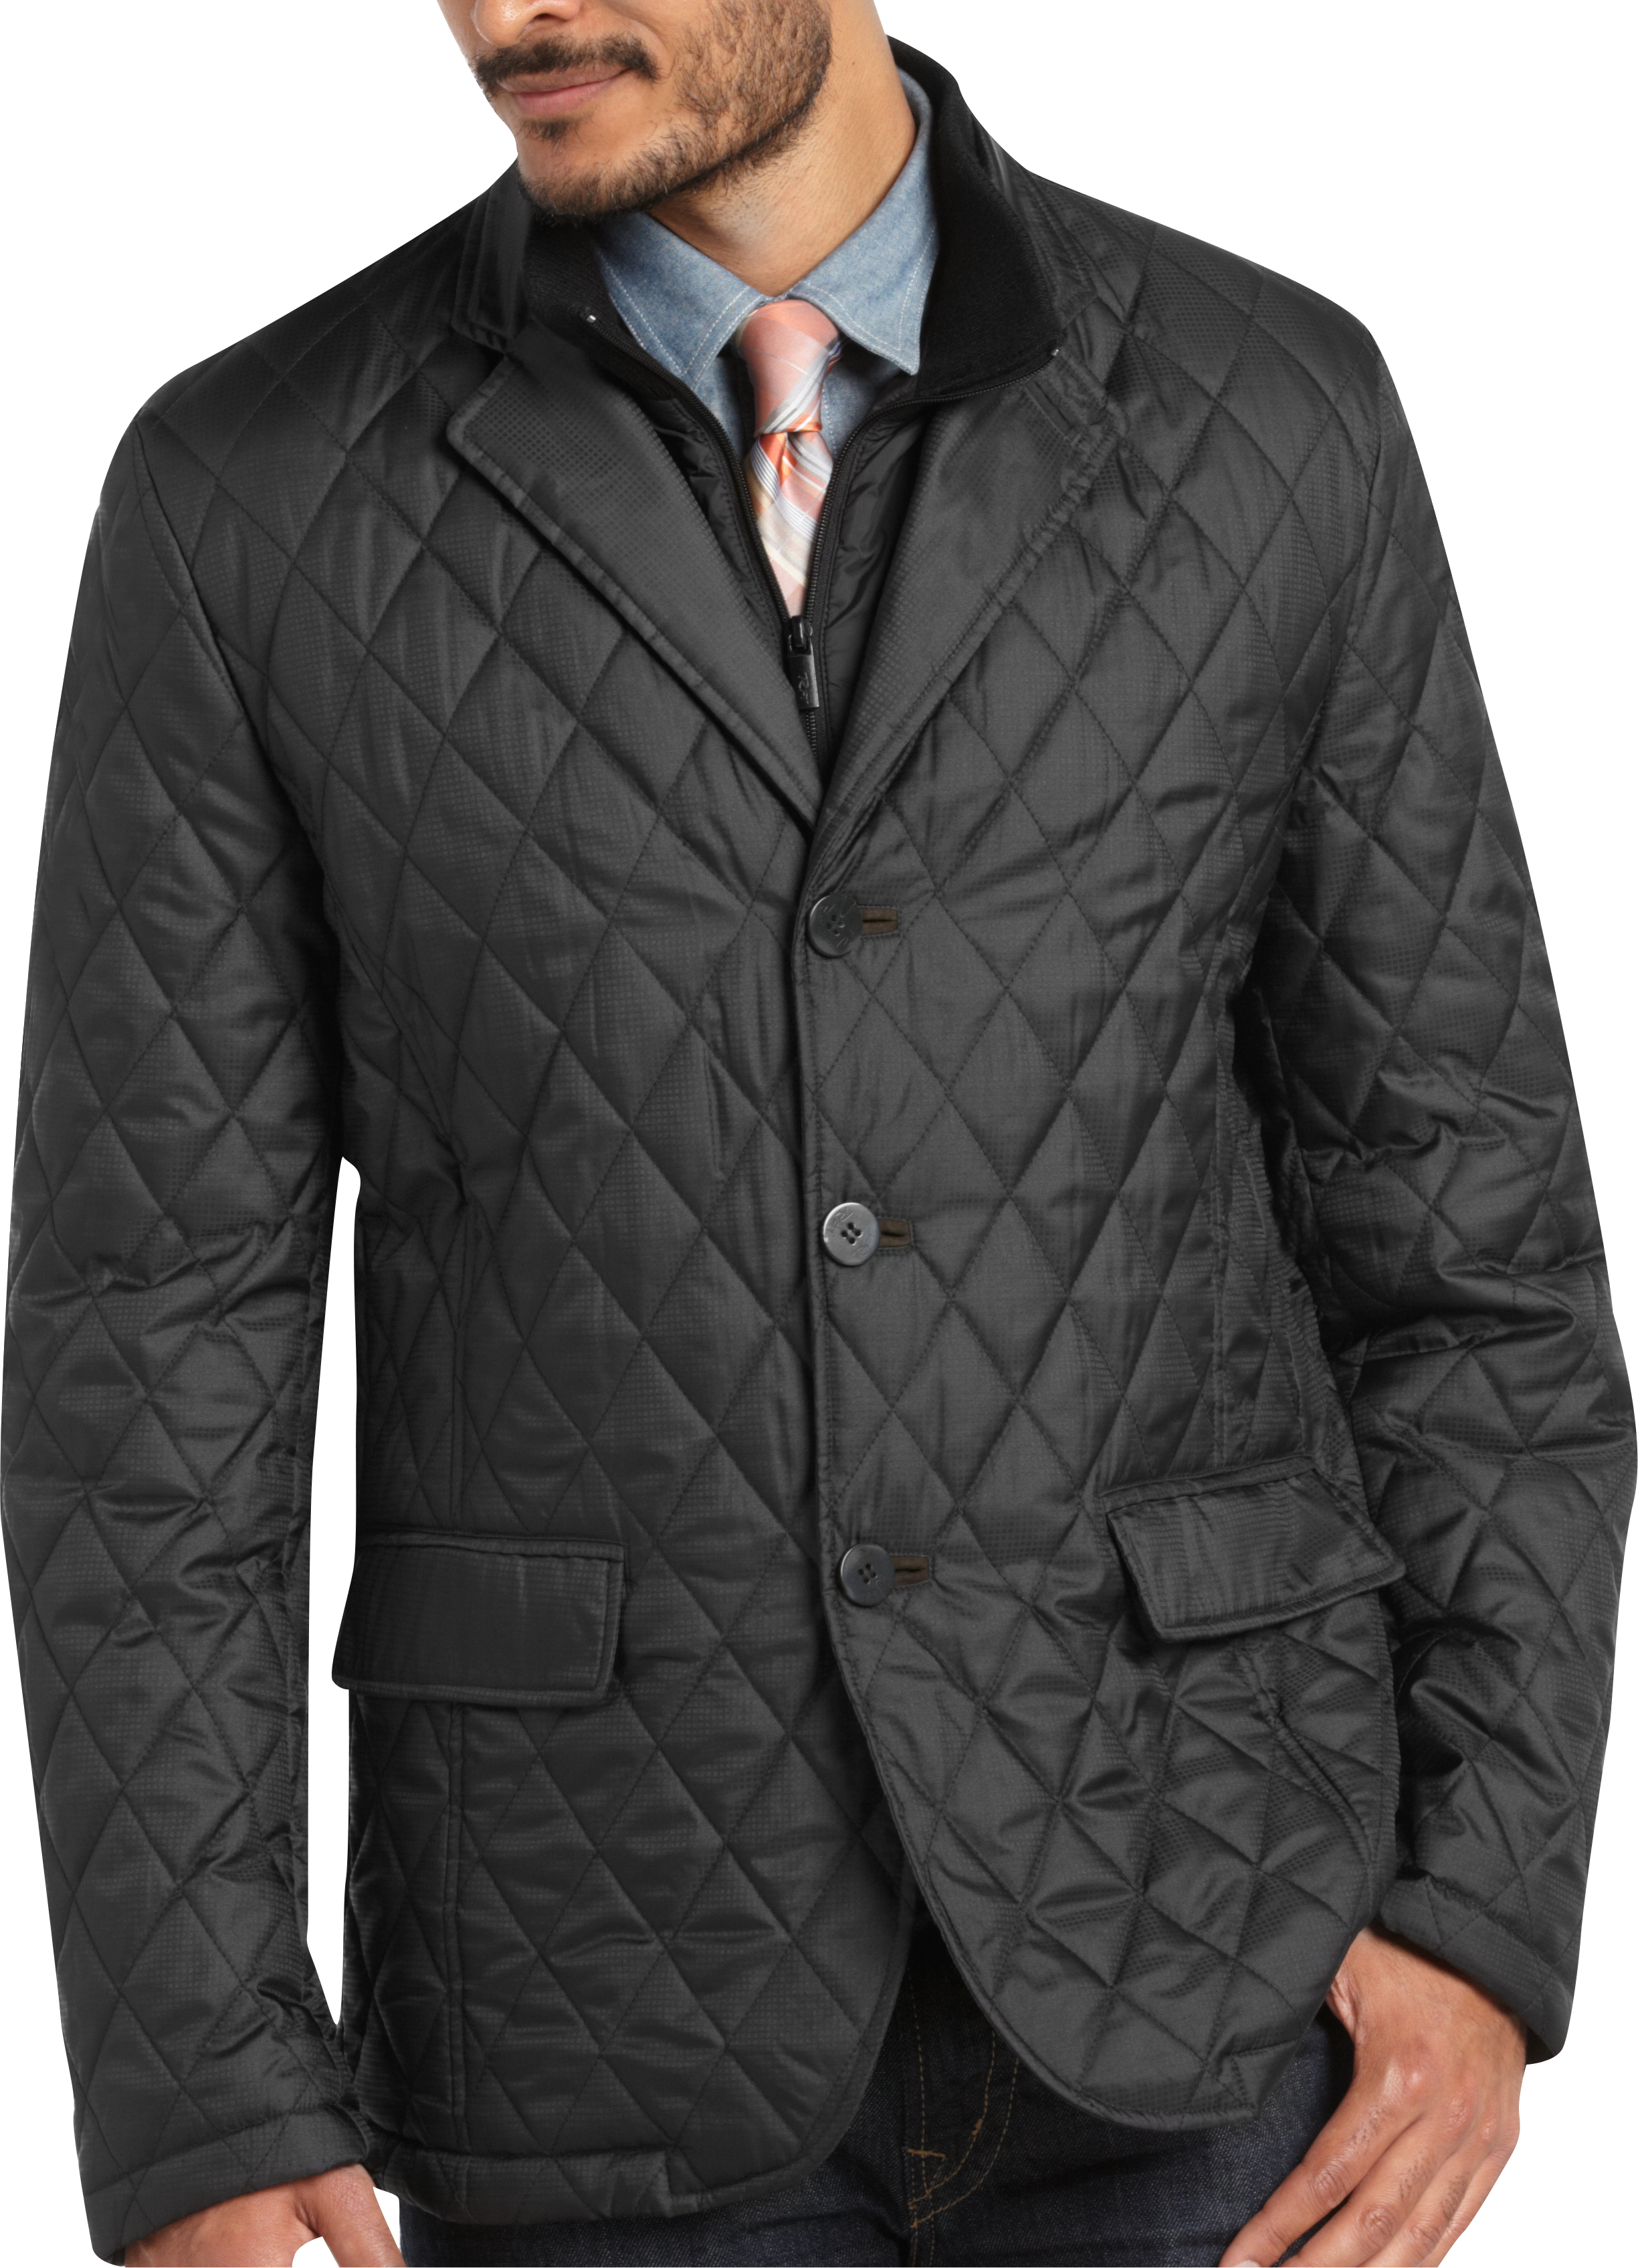 RFT by Rainforest Black Quilted Slim Fit Jacket